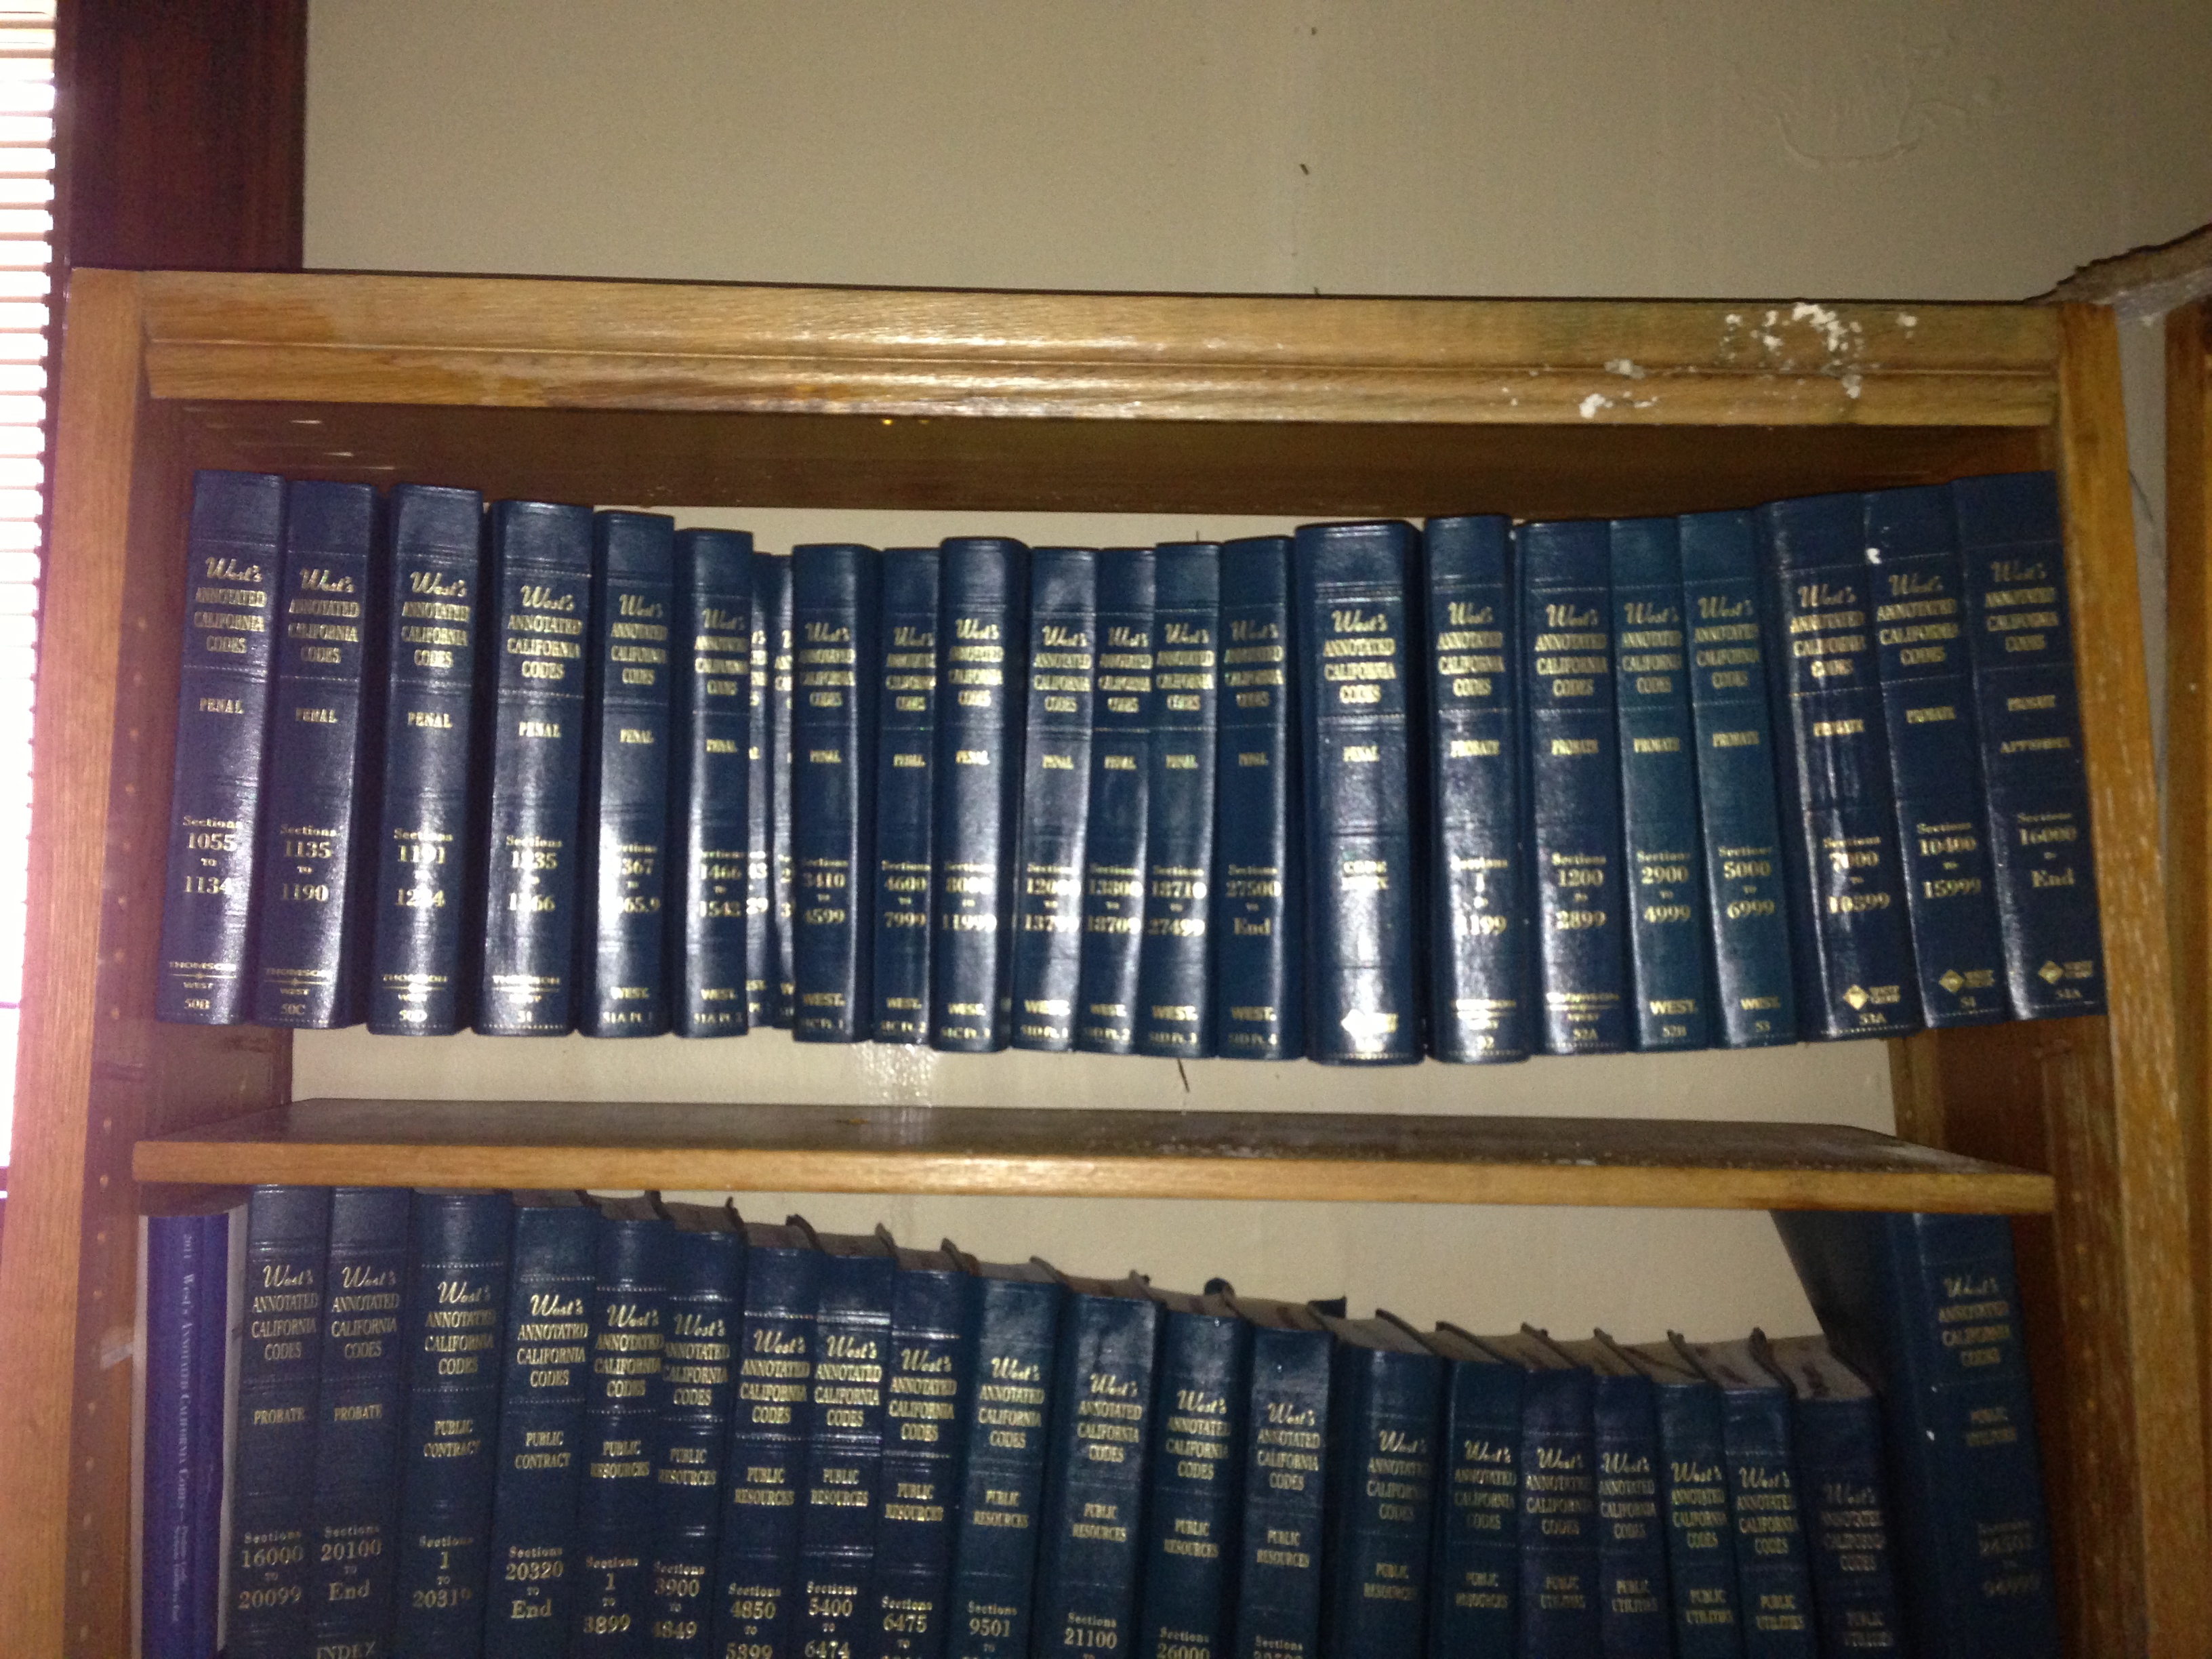 Swollen books from Water Damage